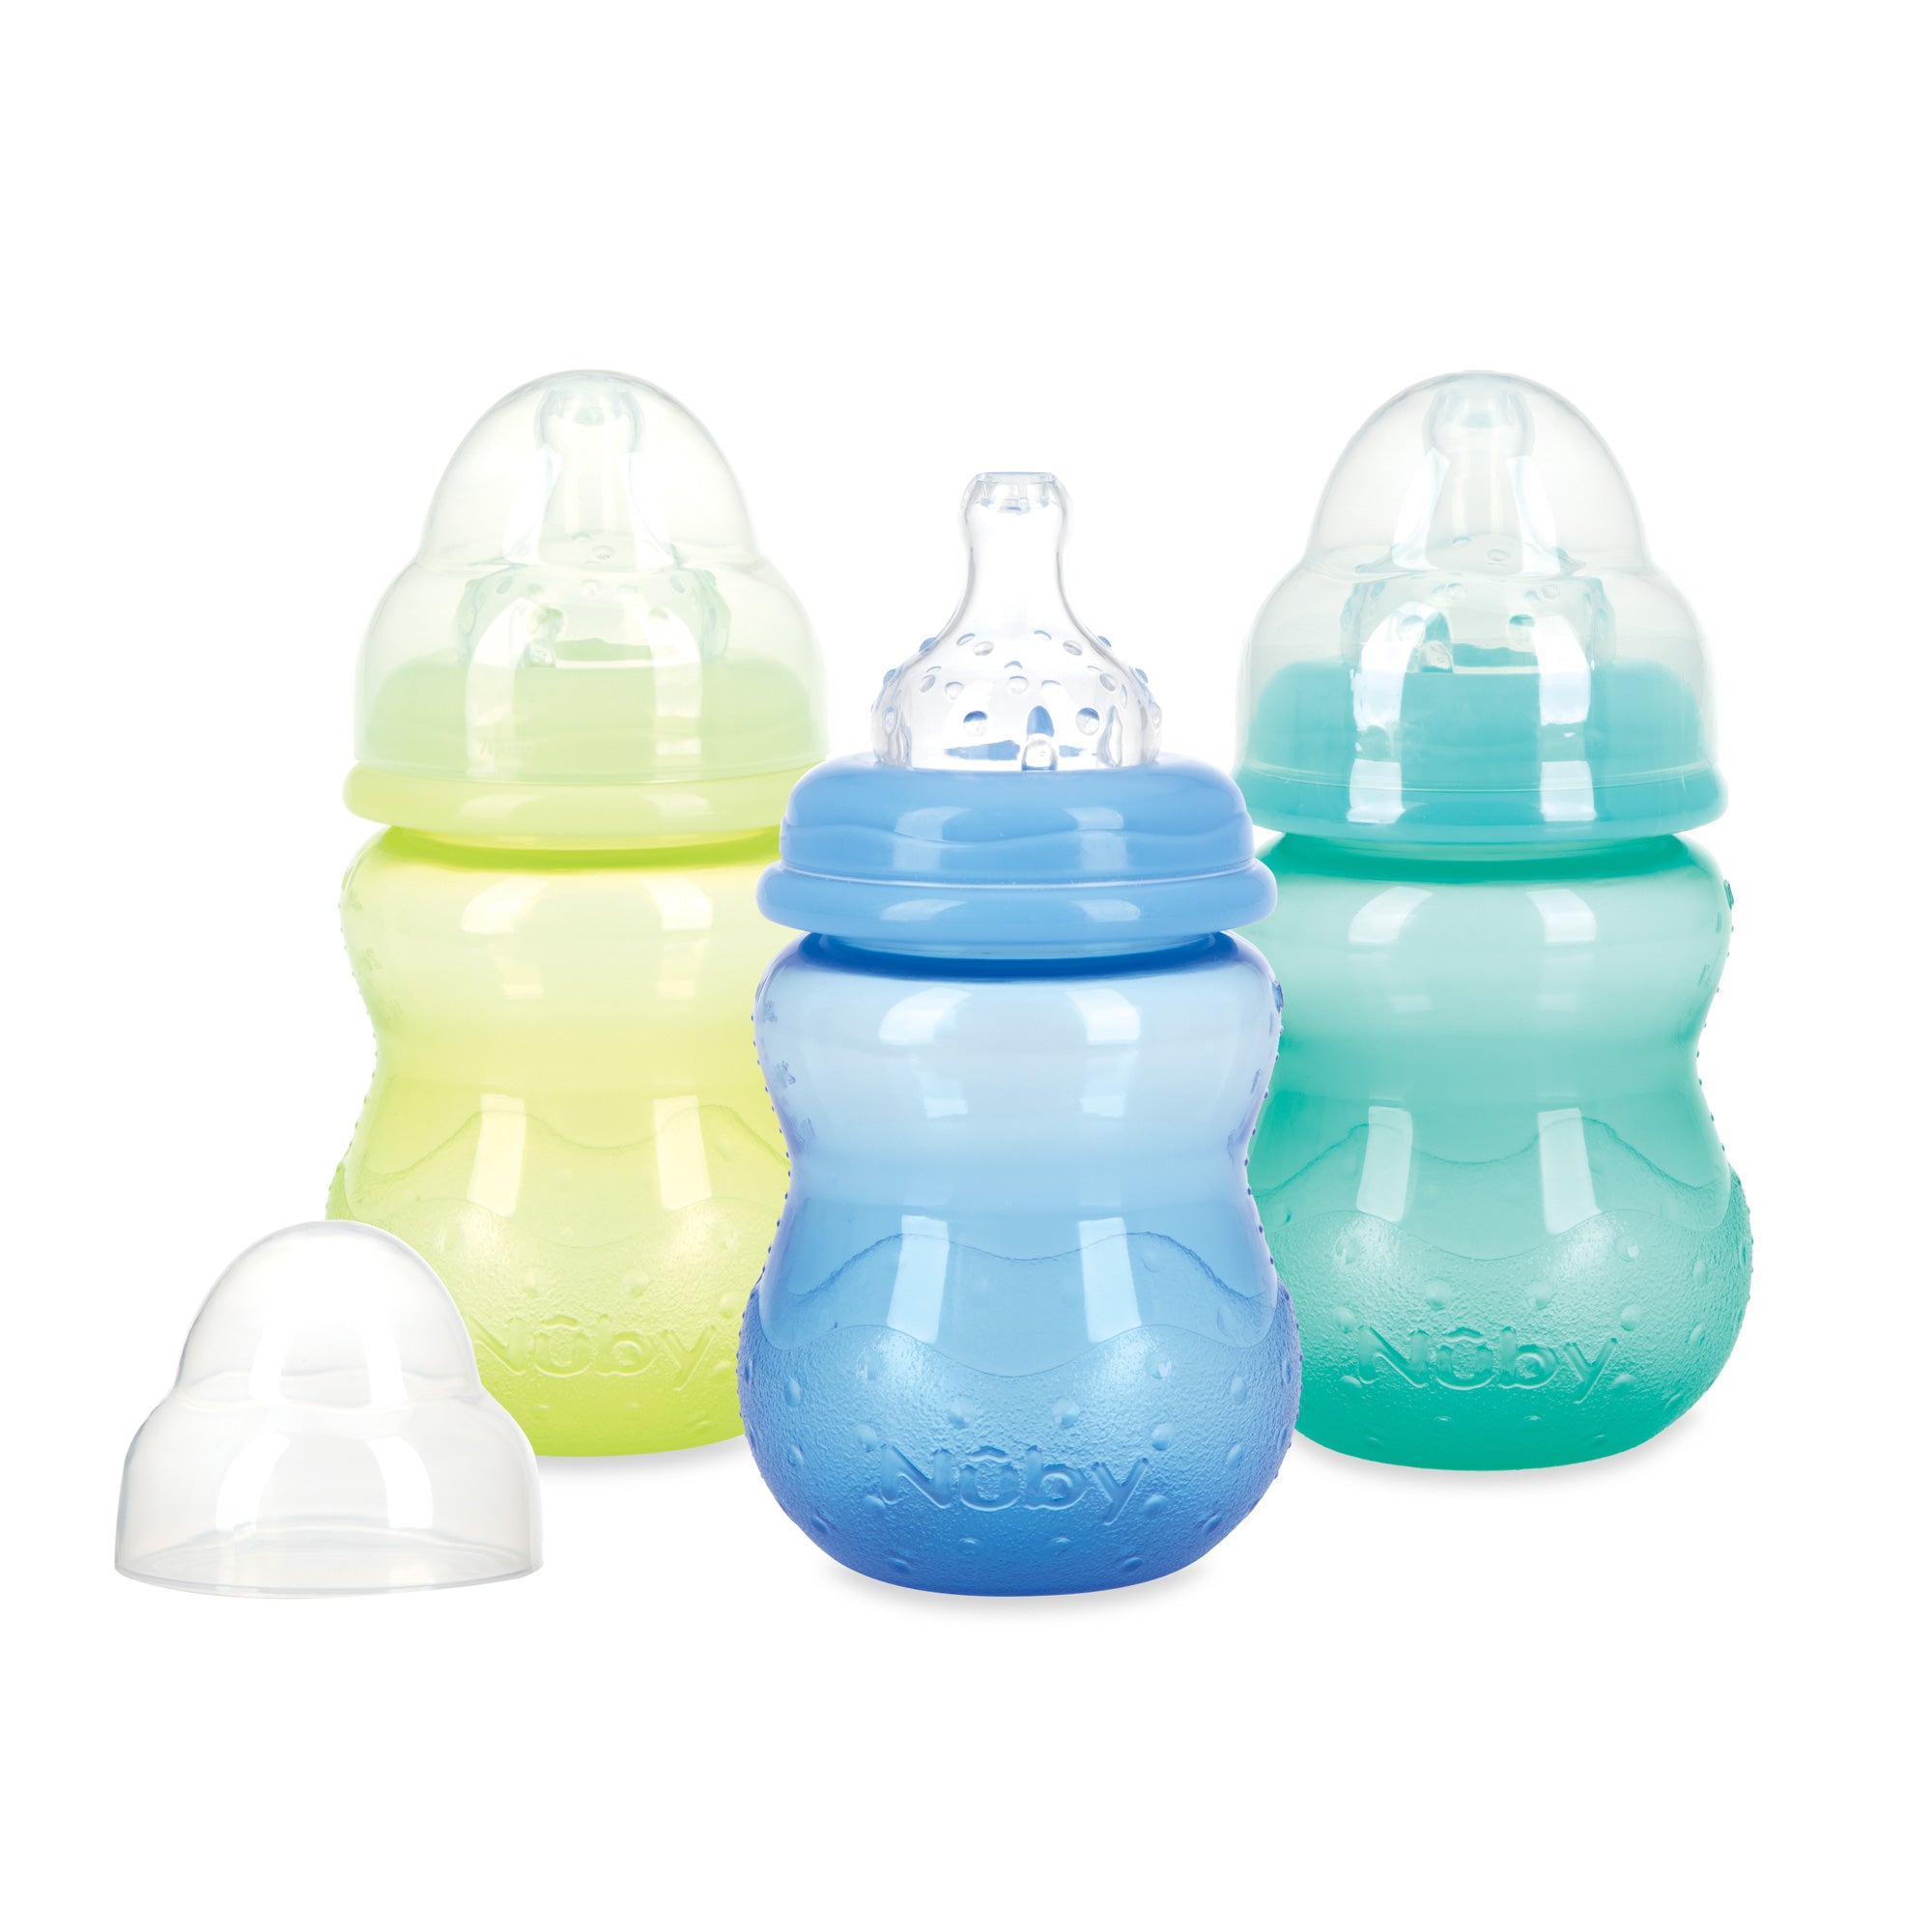 Save on Nuby Baby Medical Kit BPA Free Order Online Delivery